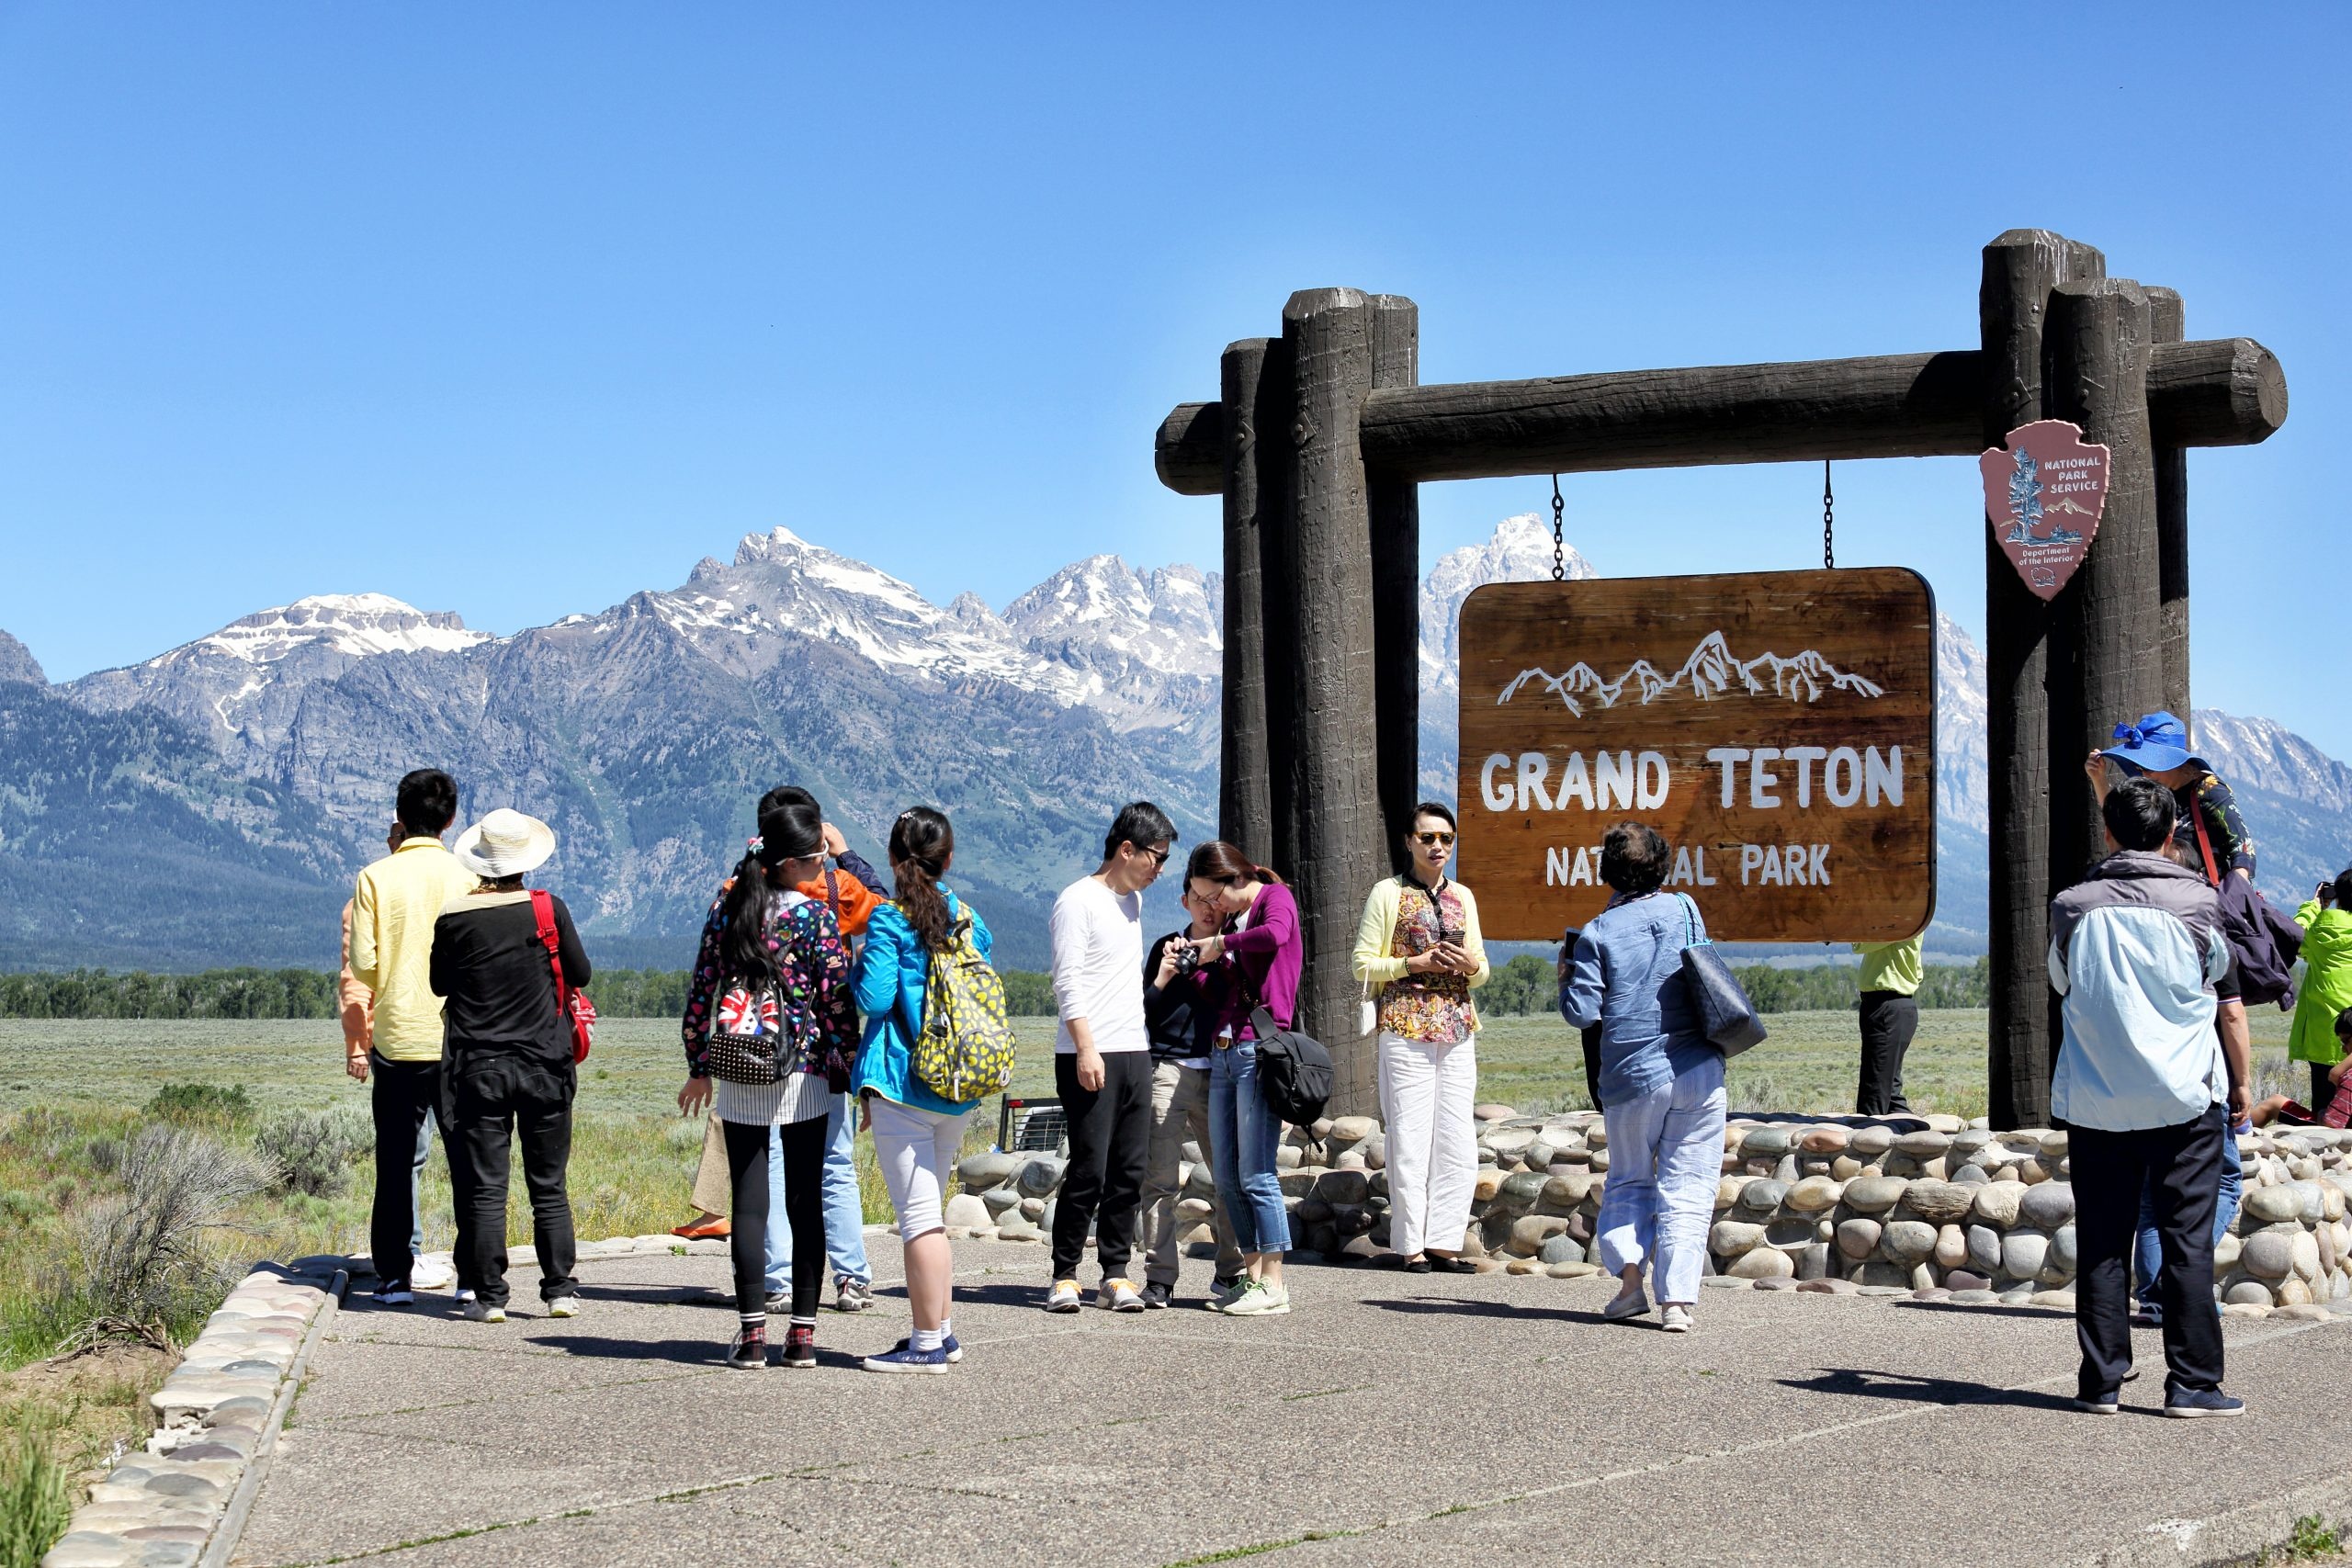 Seasoned Chinese travelers are increasingly exploring national parks throughout the U.S. Image: Shutterstock